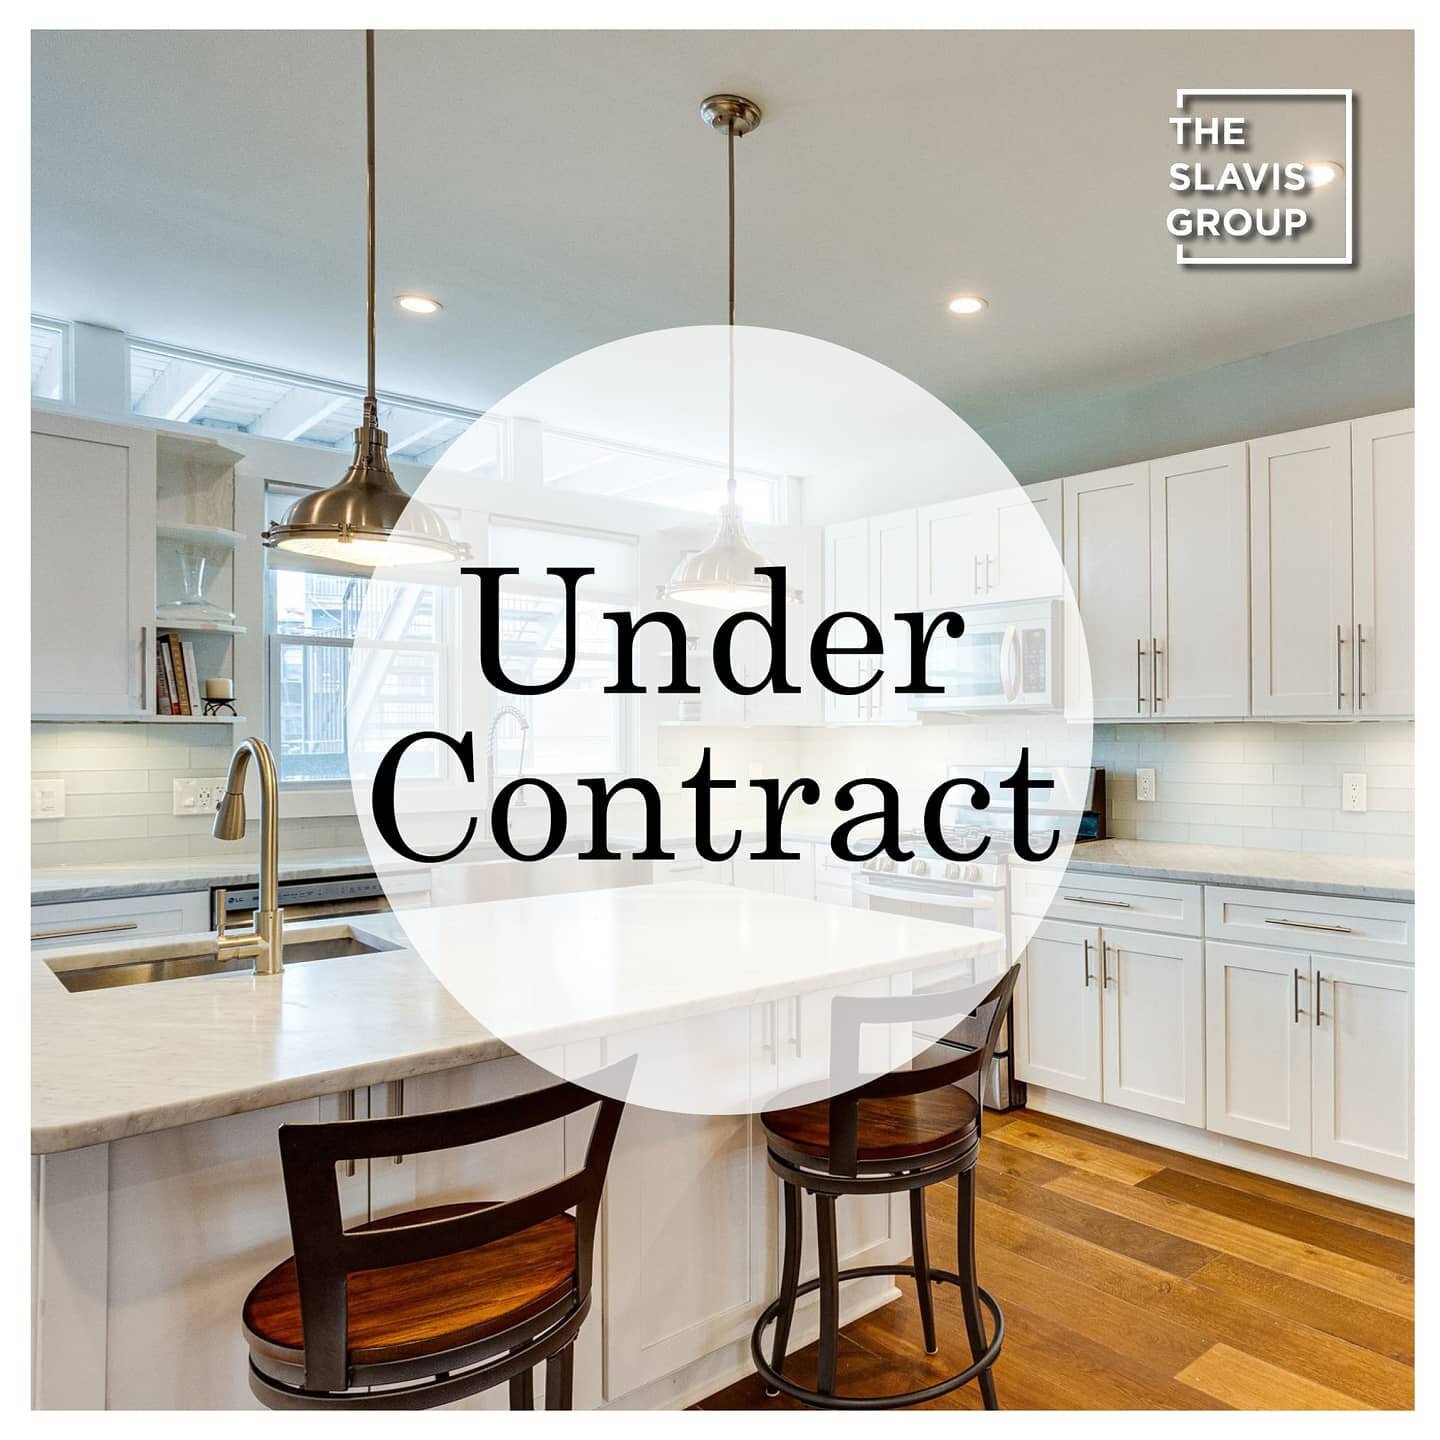 Under contract in four days! #slavisgroup #sngrealty #undercontract #ratified #realestate #dcrealestate #realtor #toprealtor #dcrealtor #listingagent #realtorlife #dc #nwdc #washingtondc #topagent #columiaheights #cohi #home #luxury #property #luxury